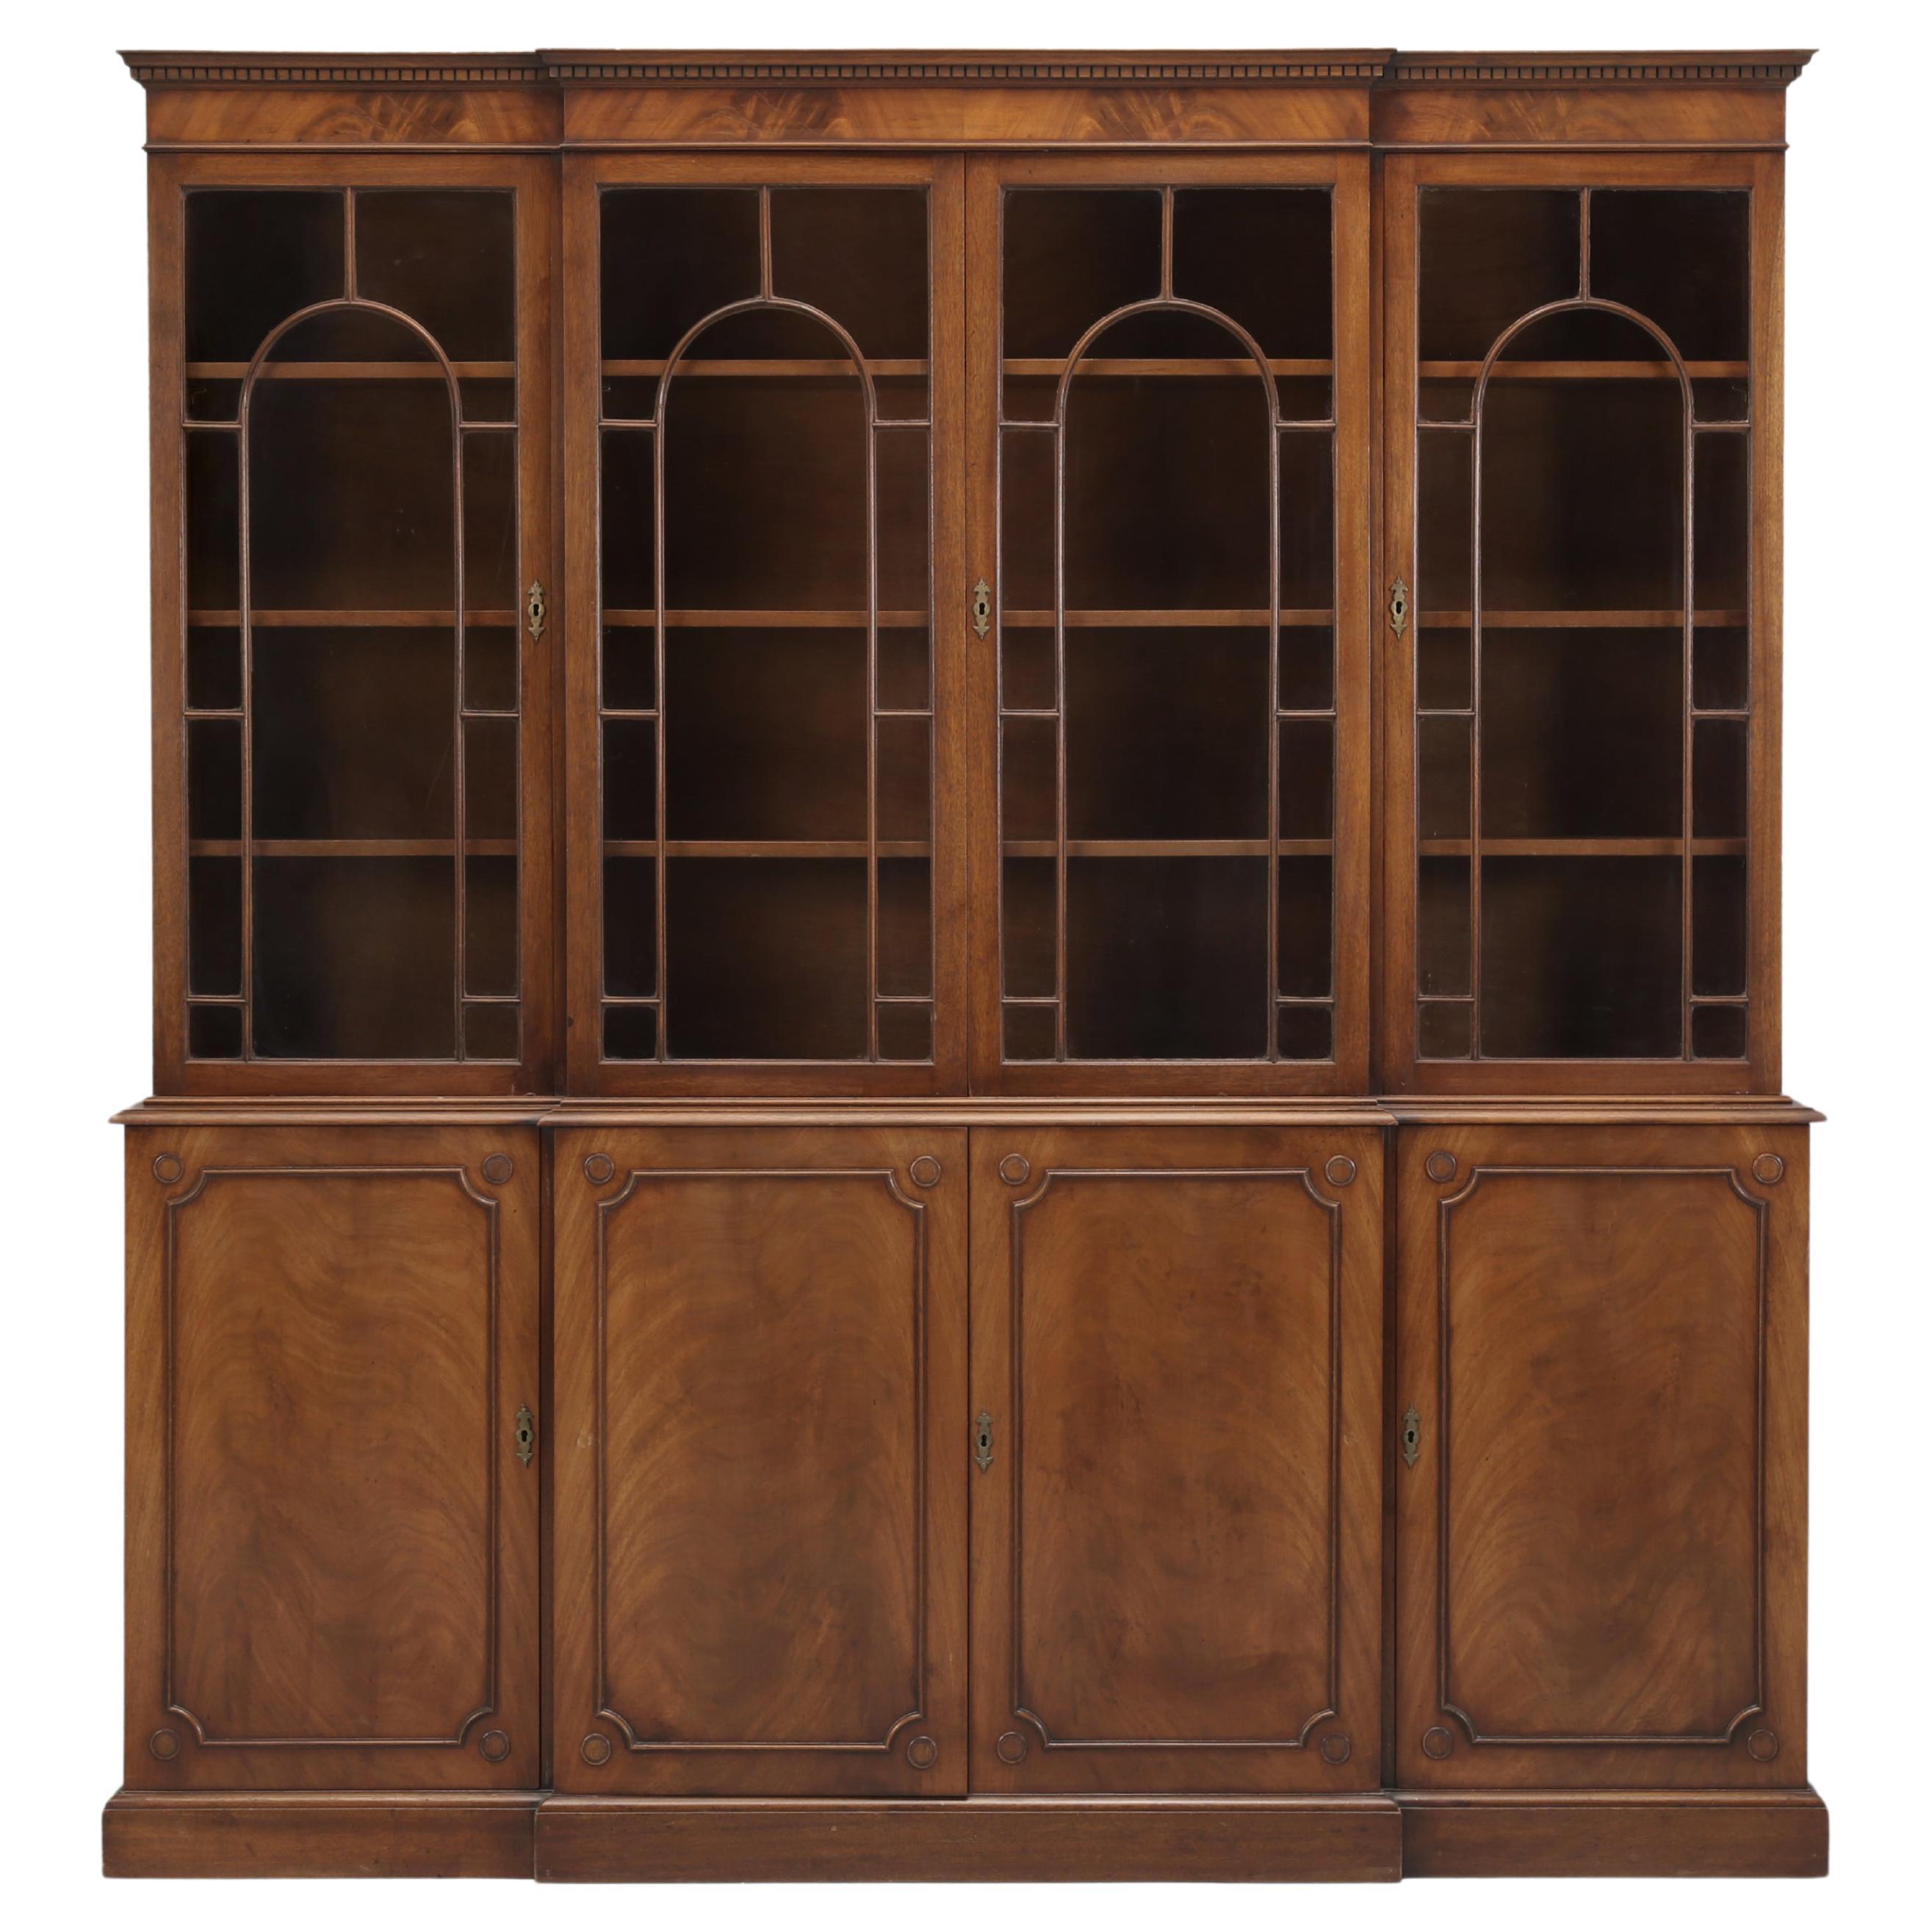 English Georgian Mahogany Breakfront Bookcase or China Cabinet in Orig Condition For Sale